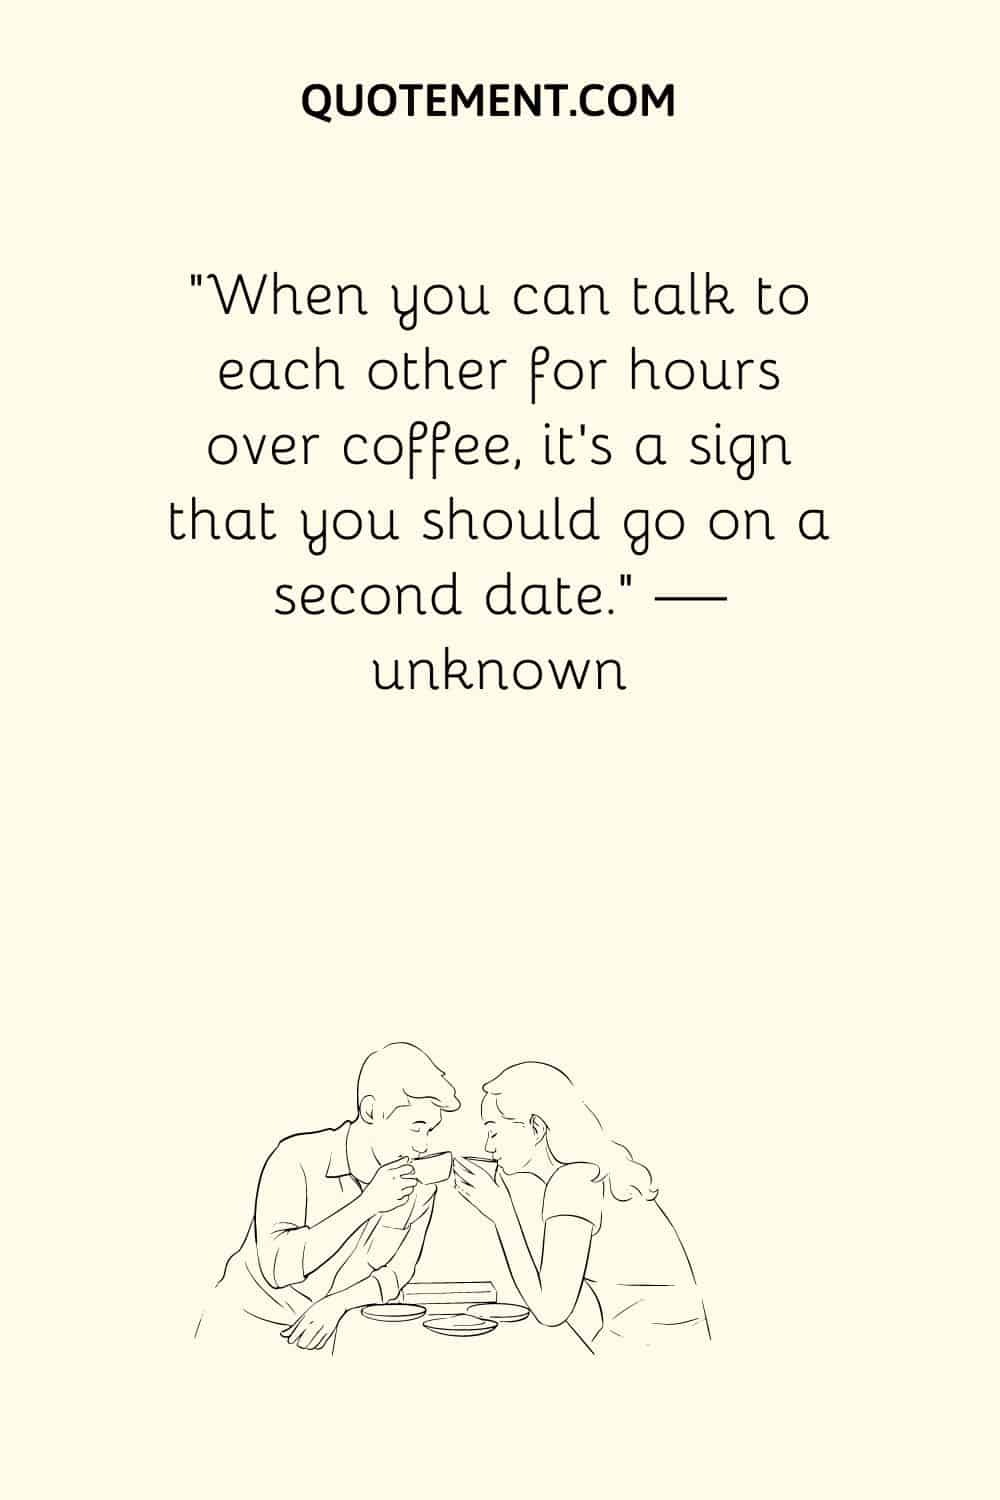 When you can talk to each other for hours over coffee, it’s a sign that you should go on a second date